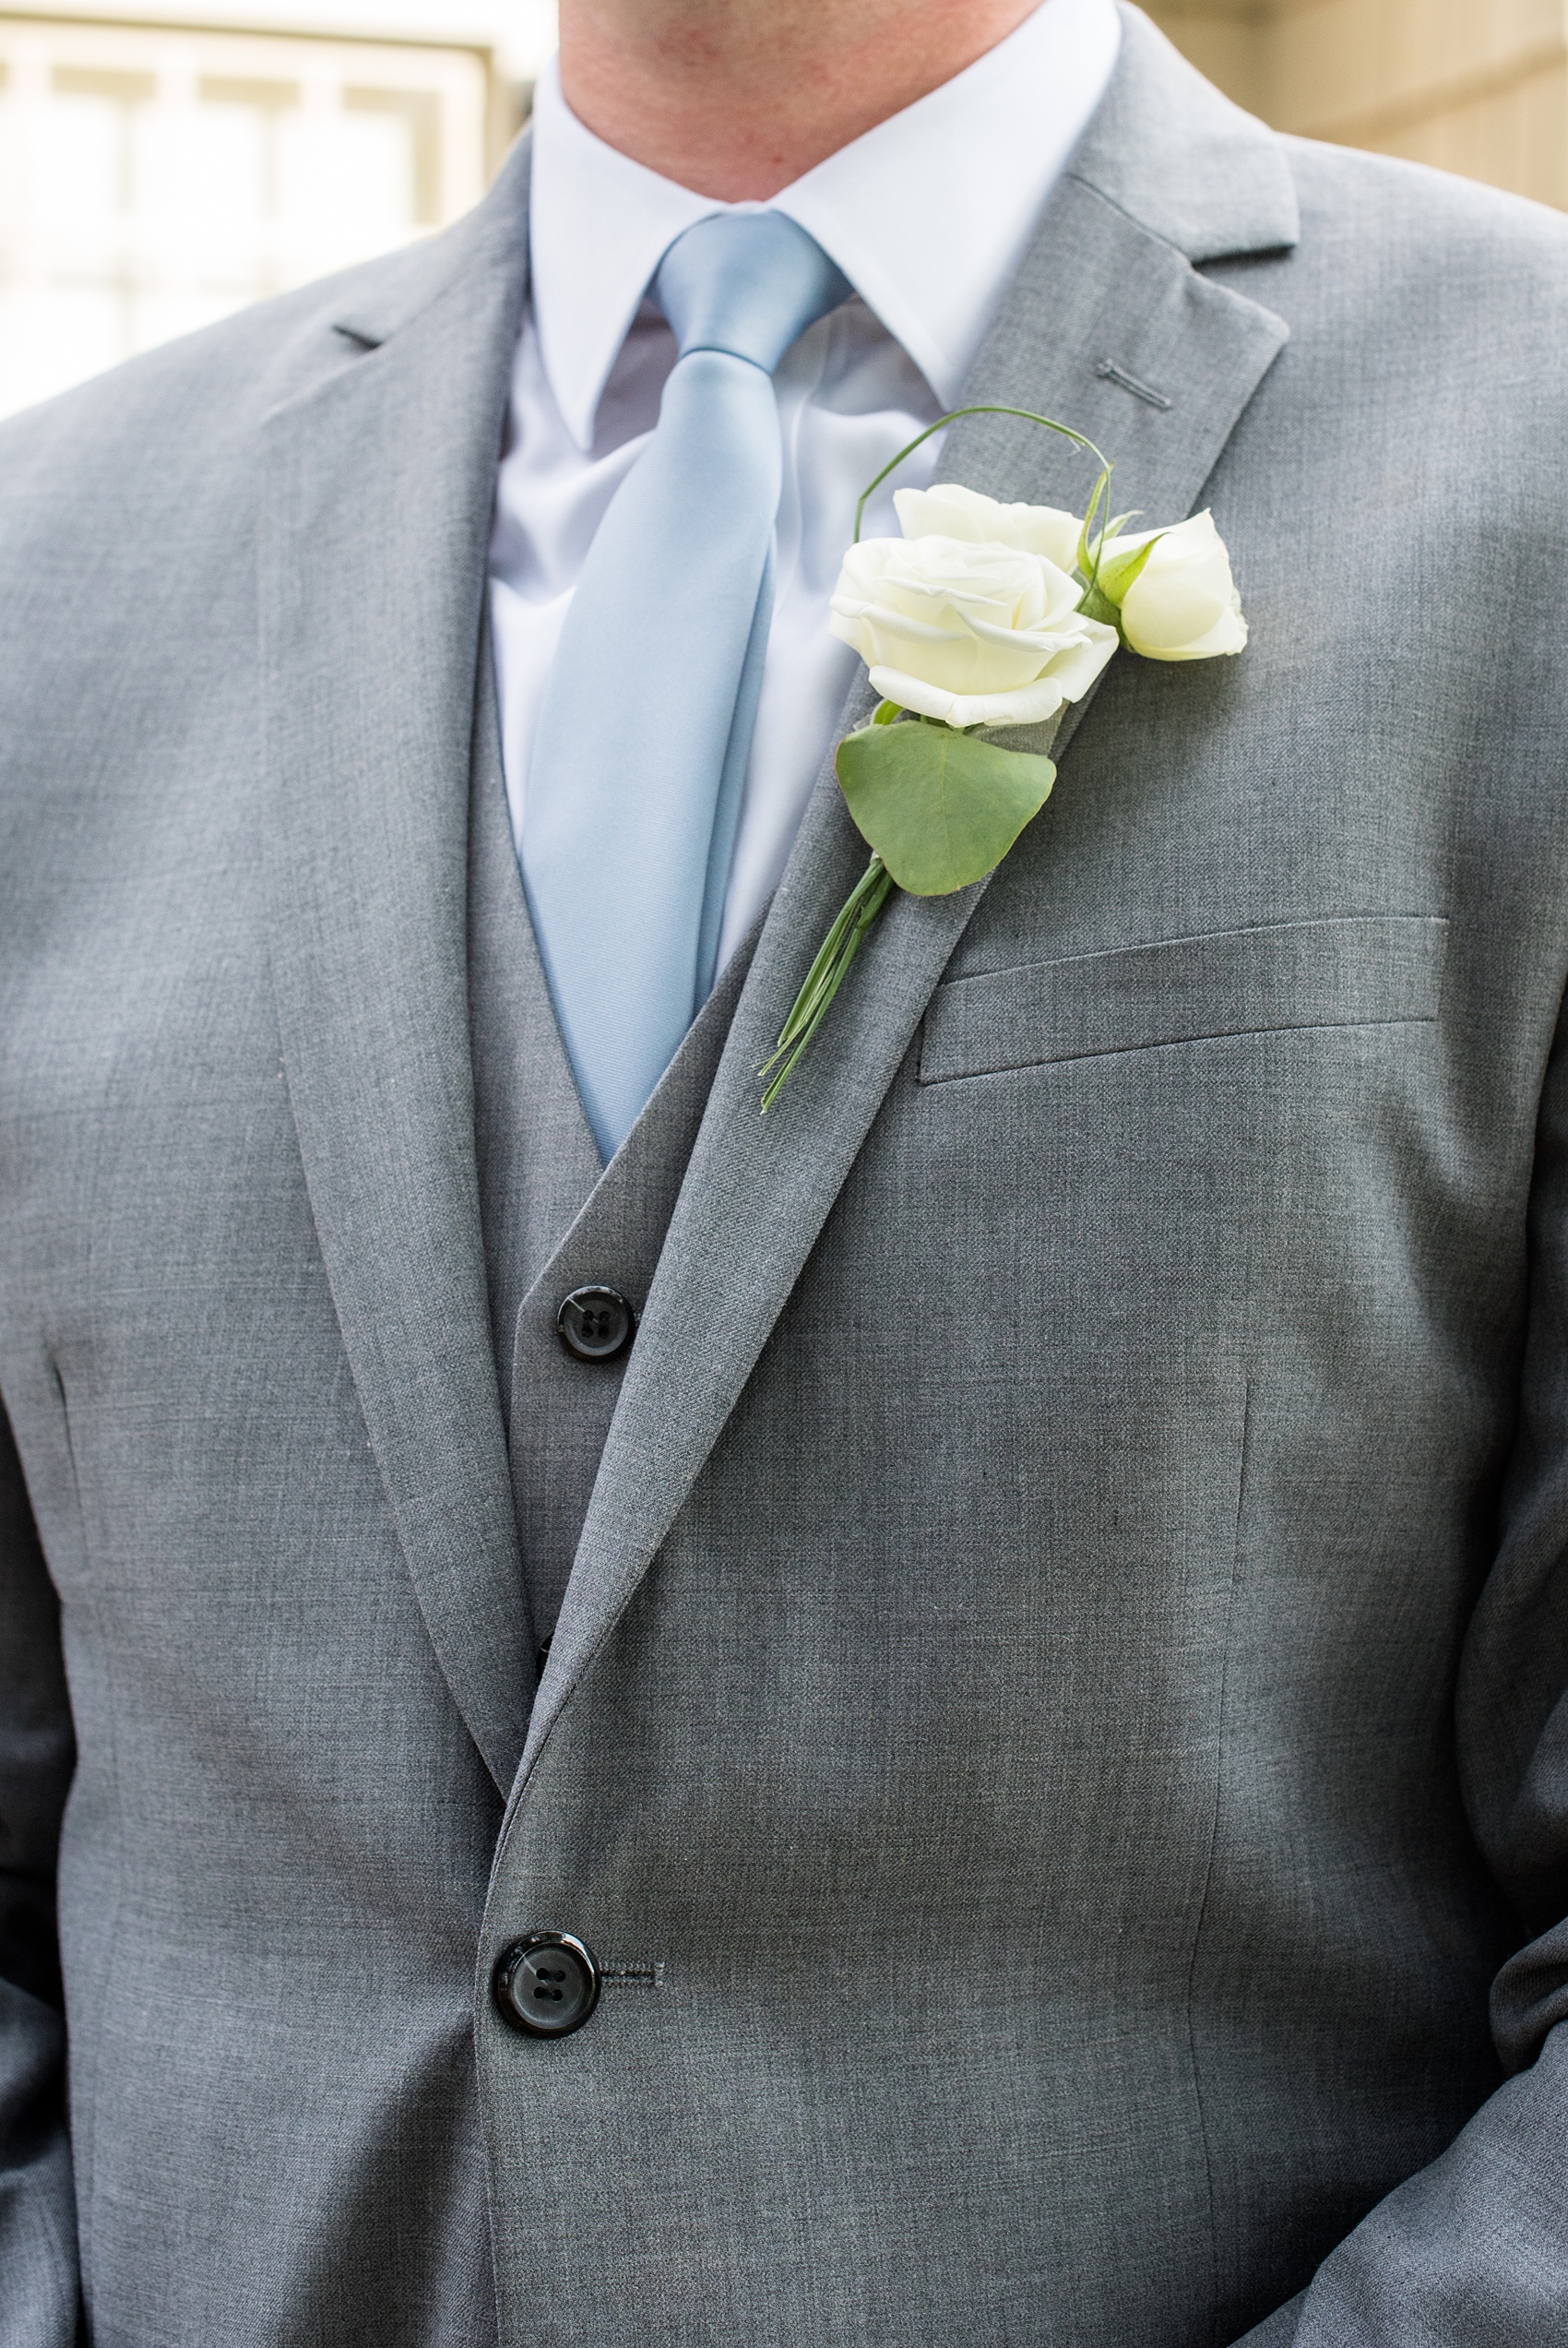 Pictures by Mikkel Paige Photography of a wedding in Durham, North Carolina. The groom wore a white rose boutonniere for the day on his grey suit. This beautiful golf course photo ideas with the bridal party, and bride will provide endless inspiration! Click through to our website for the complete post and details. #durhamNC #northcarolinawedding #southernwedding #golfcoursewedding #CountryClubWedding #groomsuit #boutonniere #DurhamWedding #summerwedding